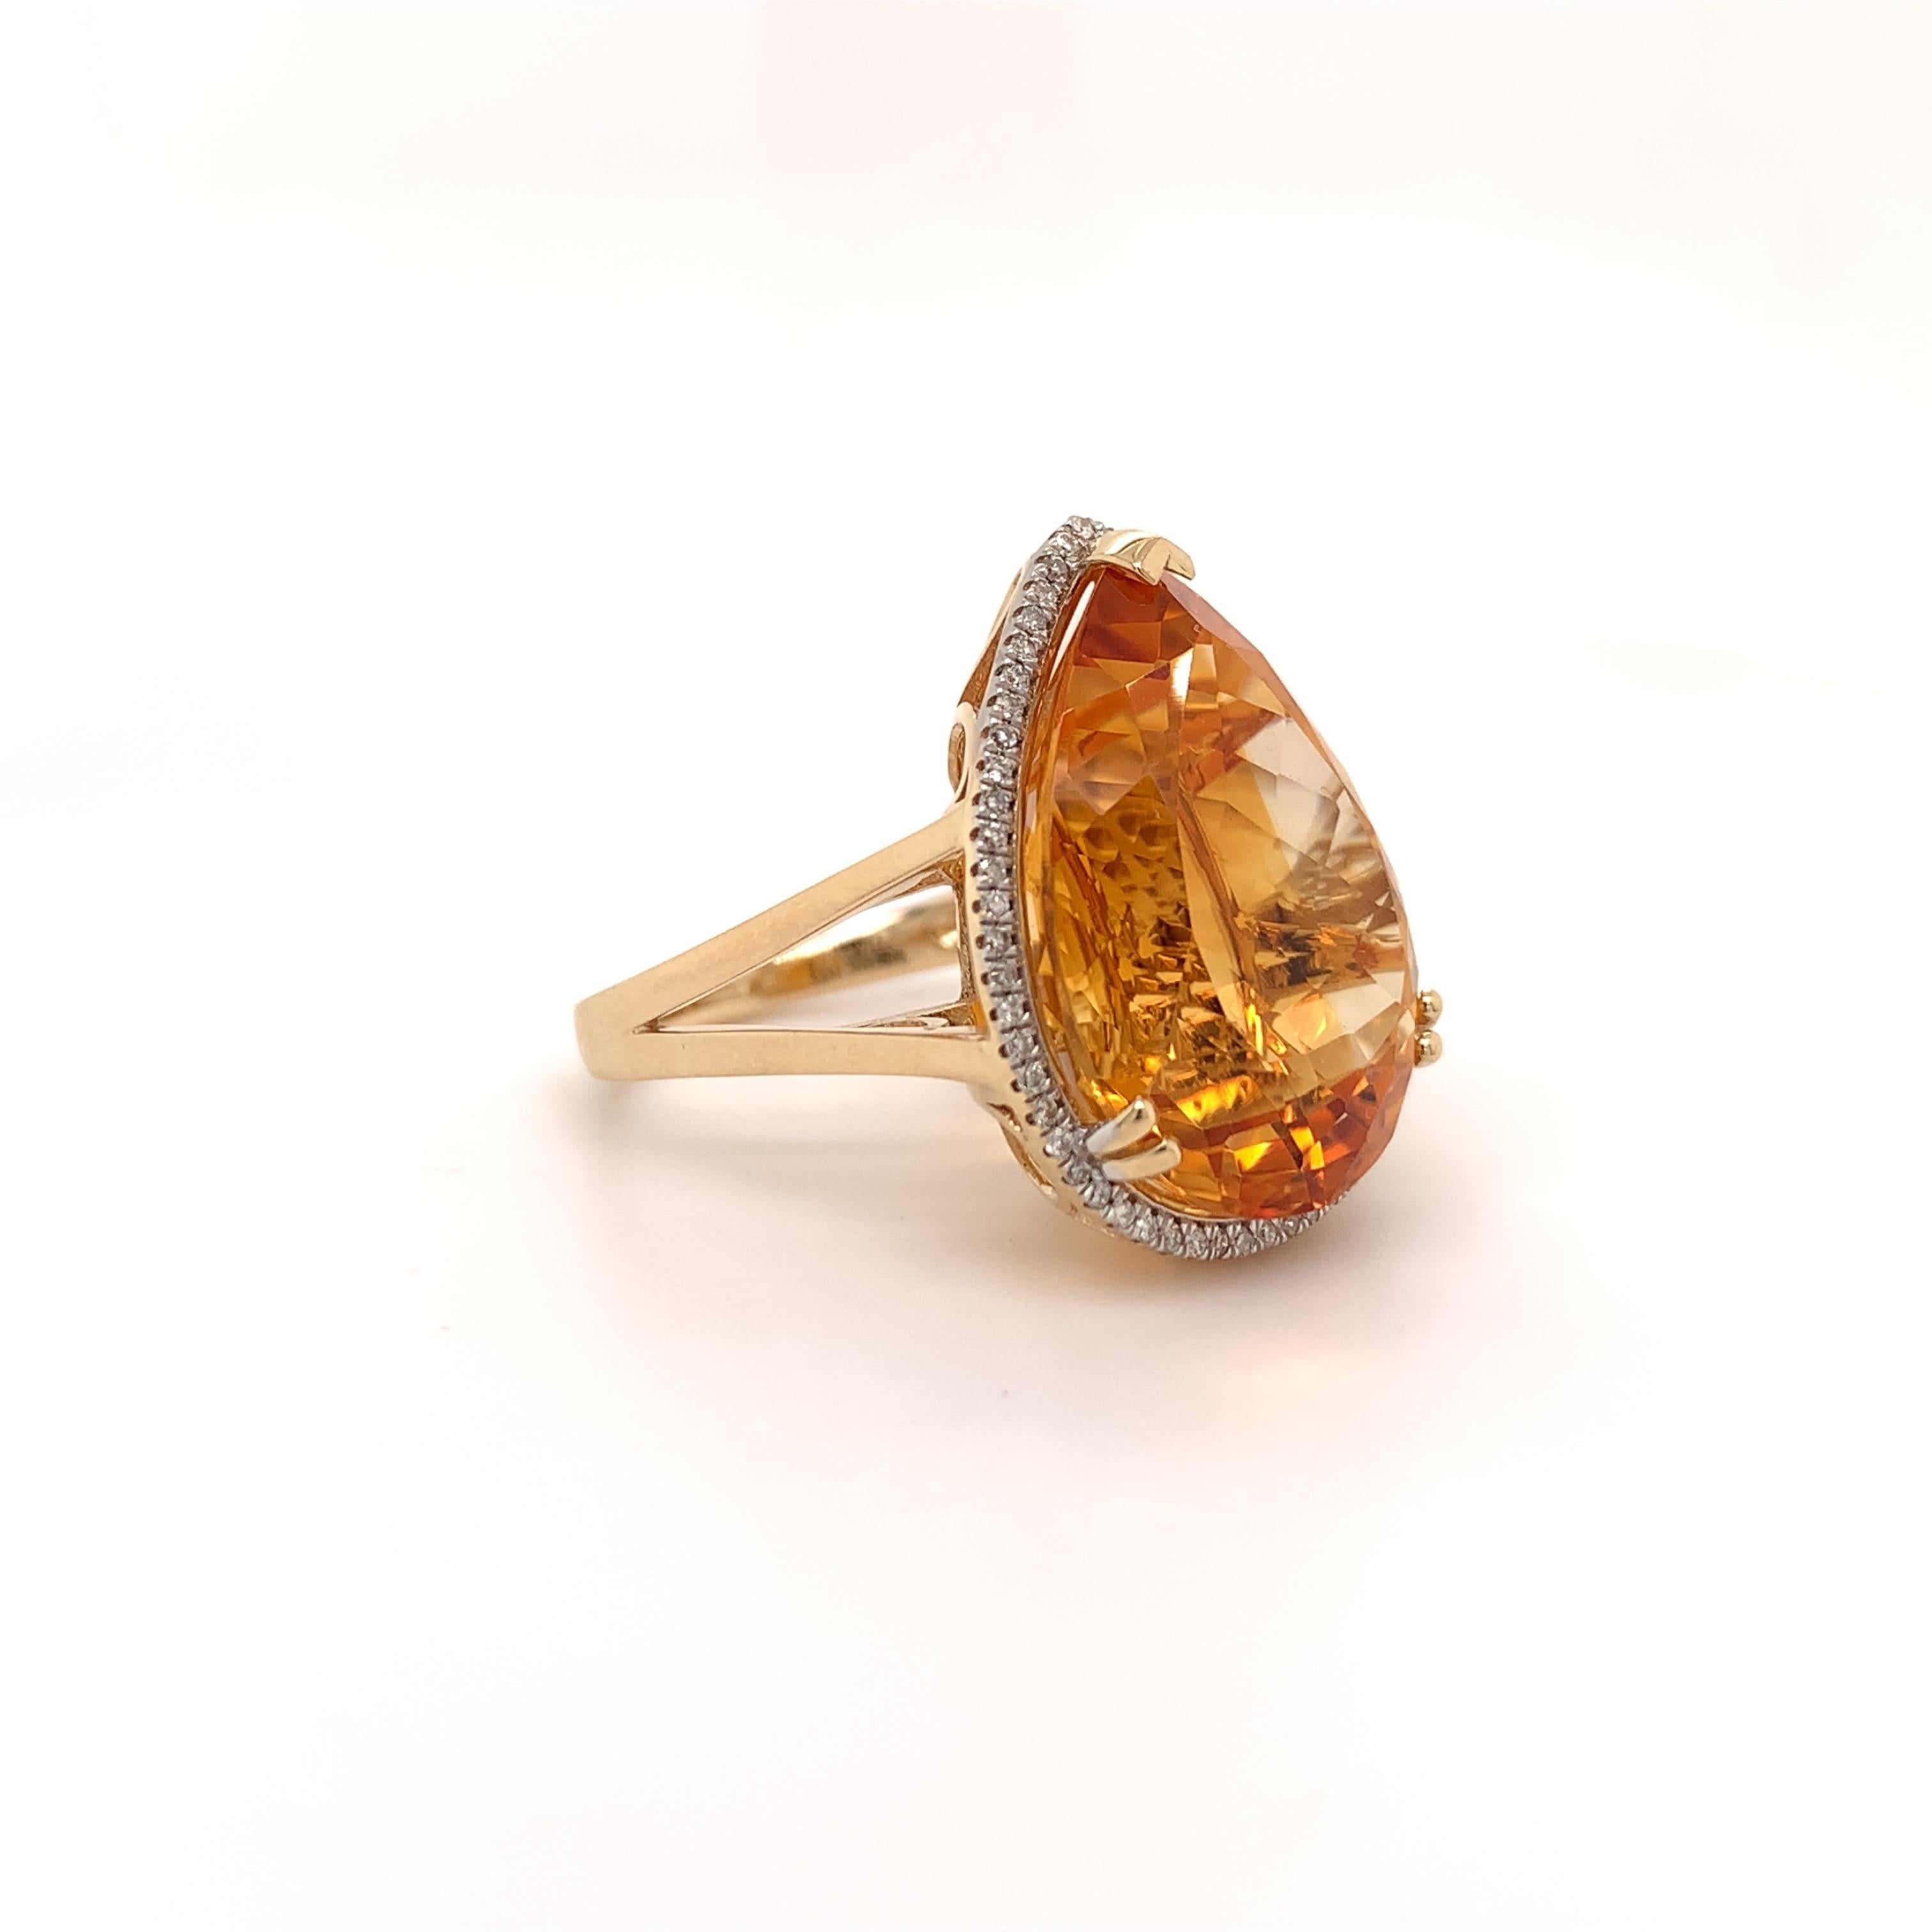 Glamourous citrine diamond cocktail ring. High brilliance, rich golden honey tone, transparent, pear shape faceted, natural 16.54 carats citrine mounted in high profile open basket with 4 bead prongs & 1 knife-edge prong, accented with a round